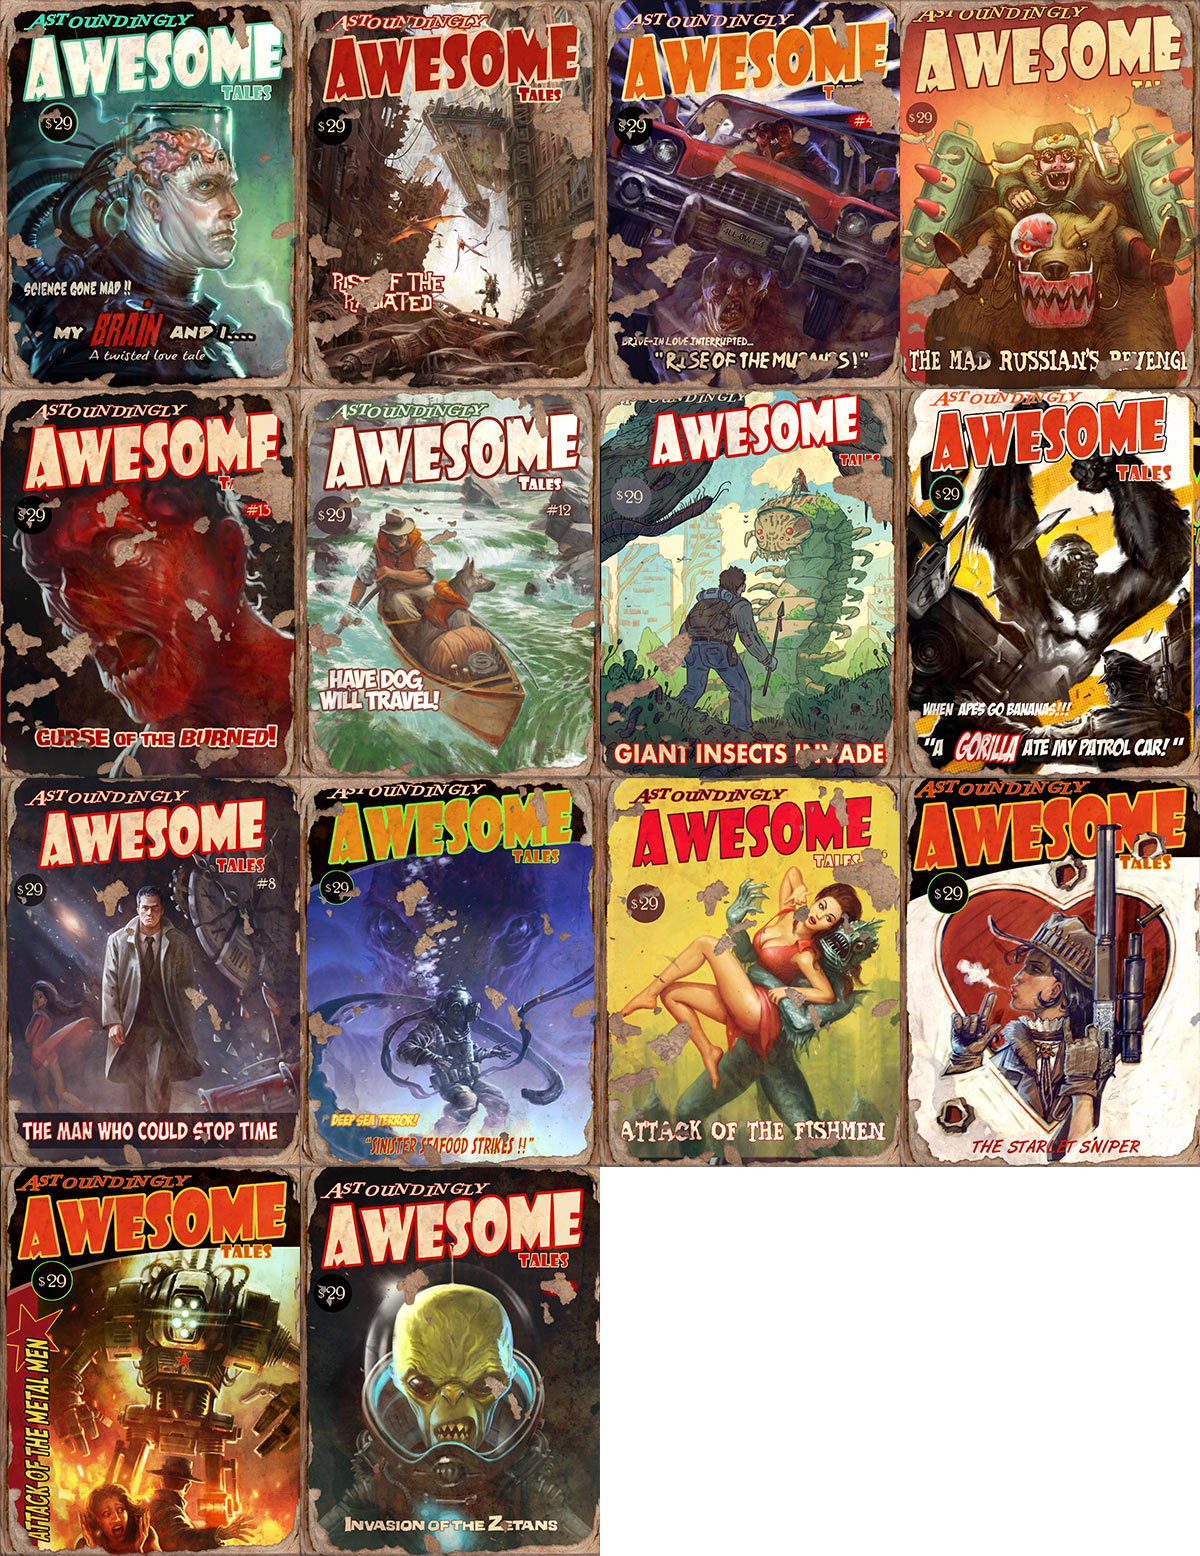 Fallout 76 - Astonishingly Awesome Tales Magazines in Fallout 76